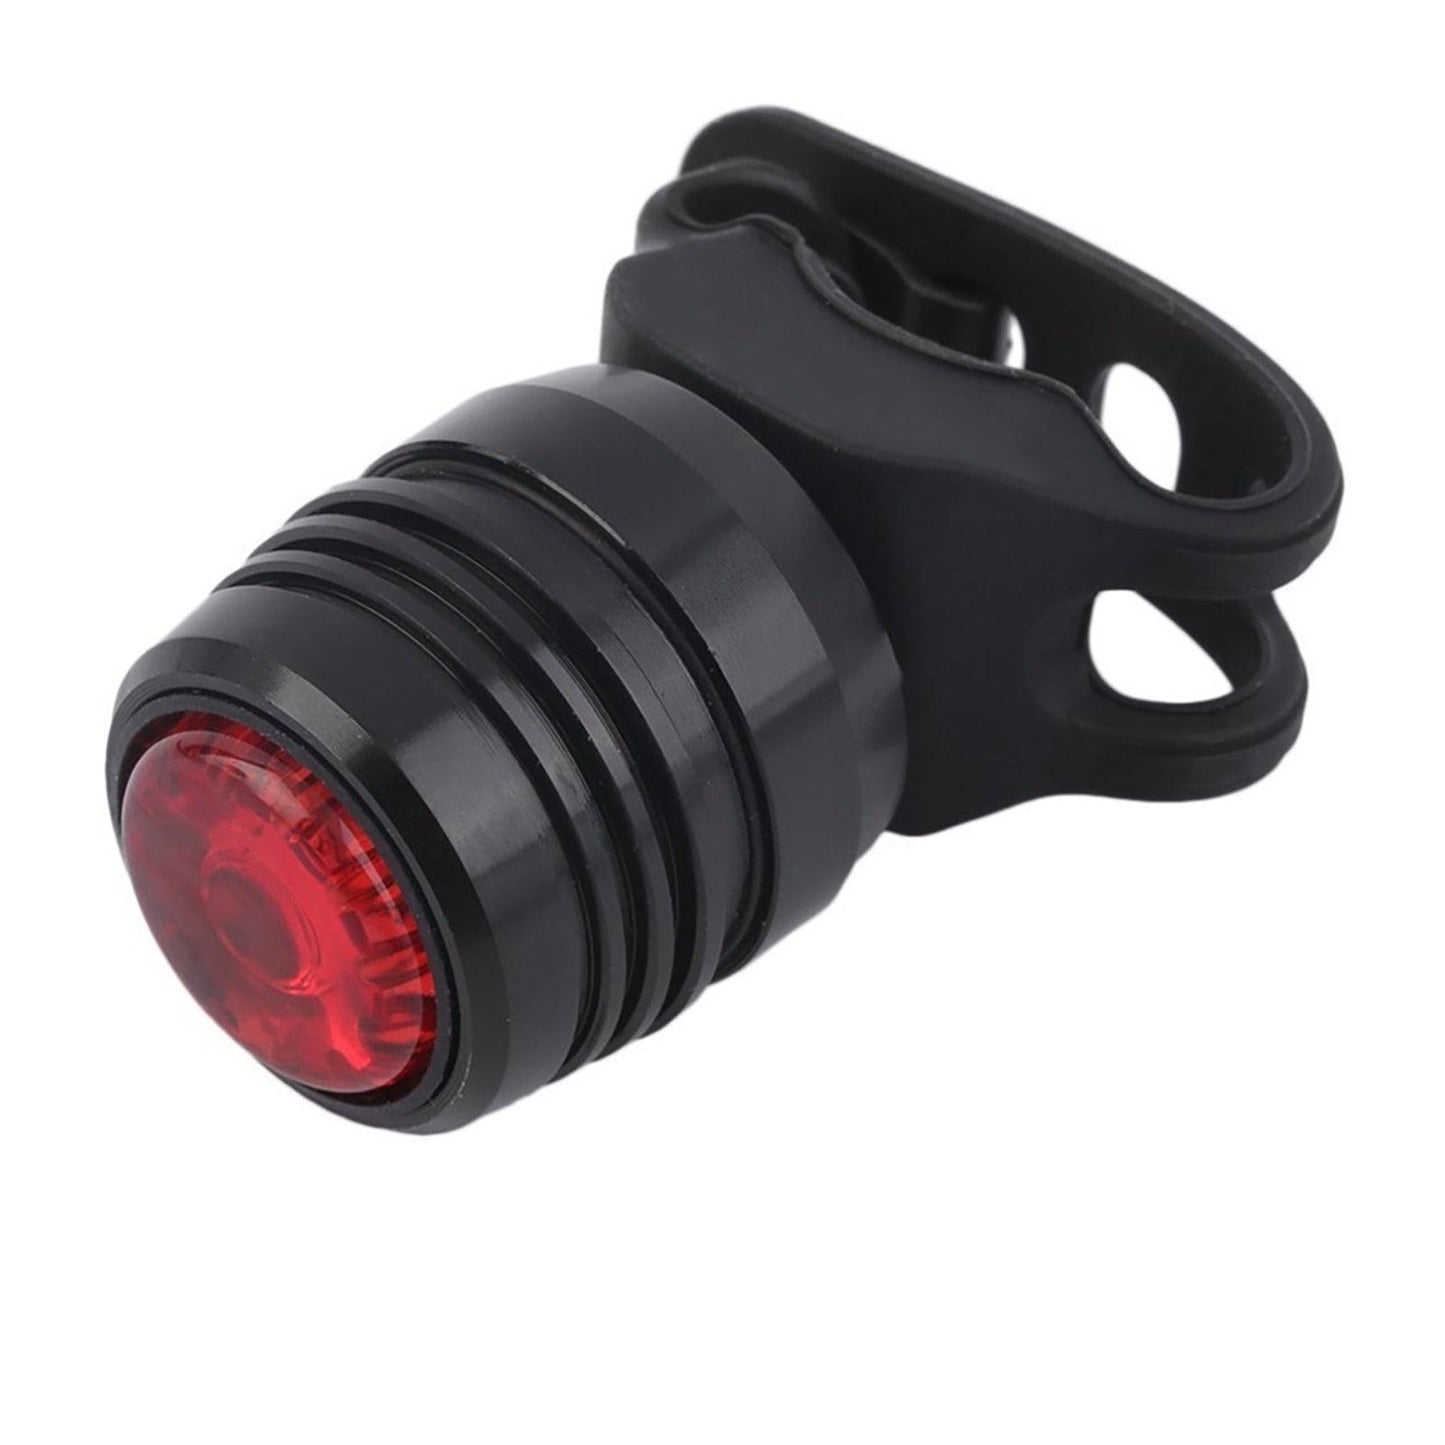 LED Bike Taillight Bicycle Front Rear Light USB Rechargeable Safety Warning Bike Headlight Lamp Safety Bicicleta Для Велосипеда - Pogo Cycles